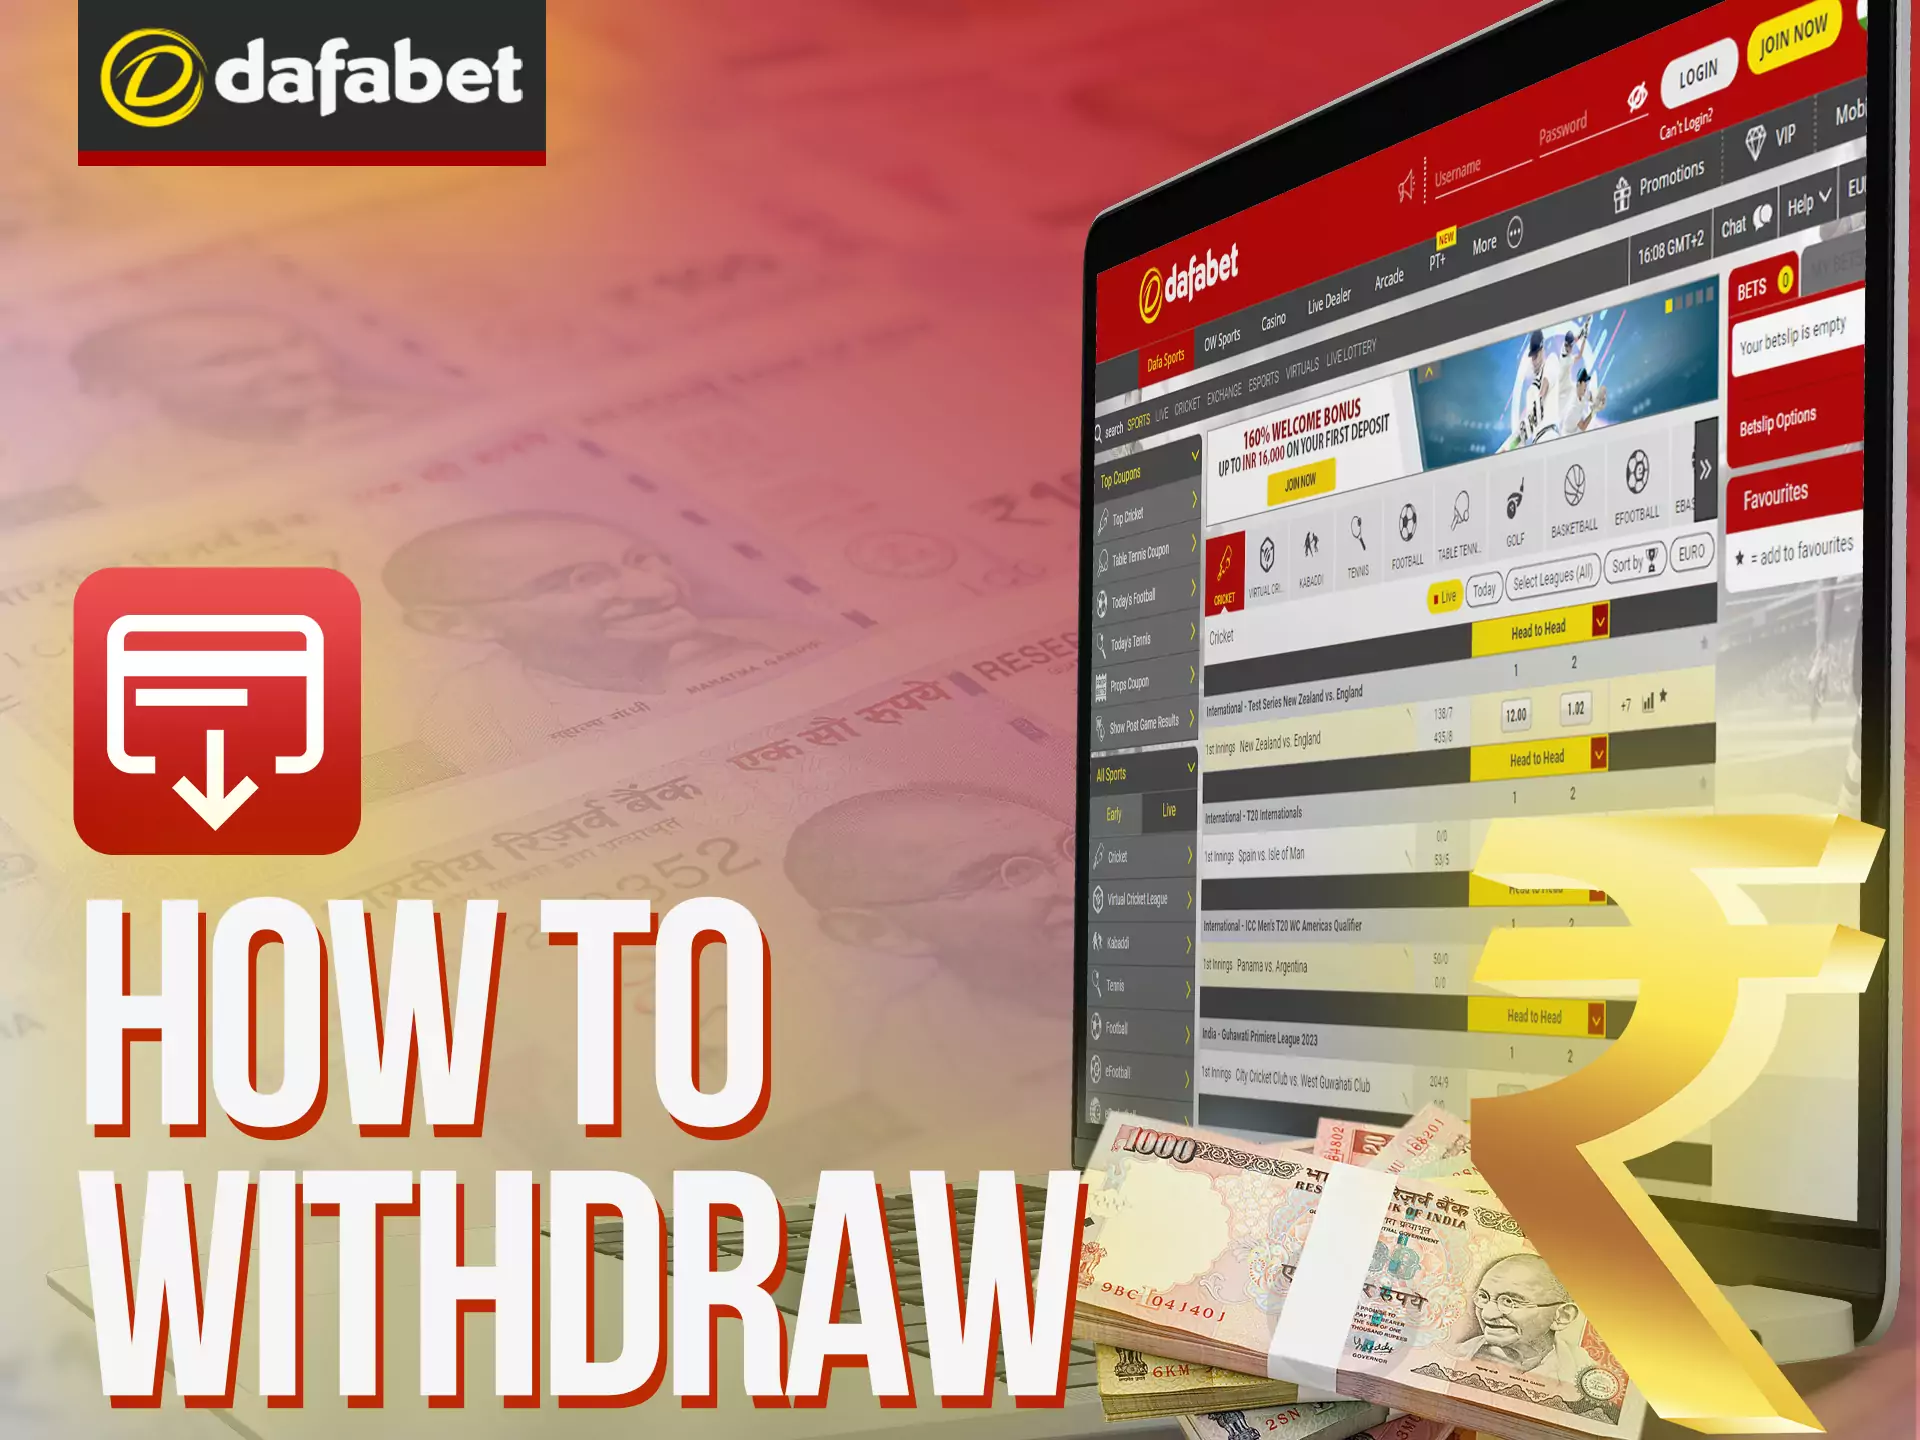 With these instructions, learn how easy it is to withdraw winnings from Dafabet.